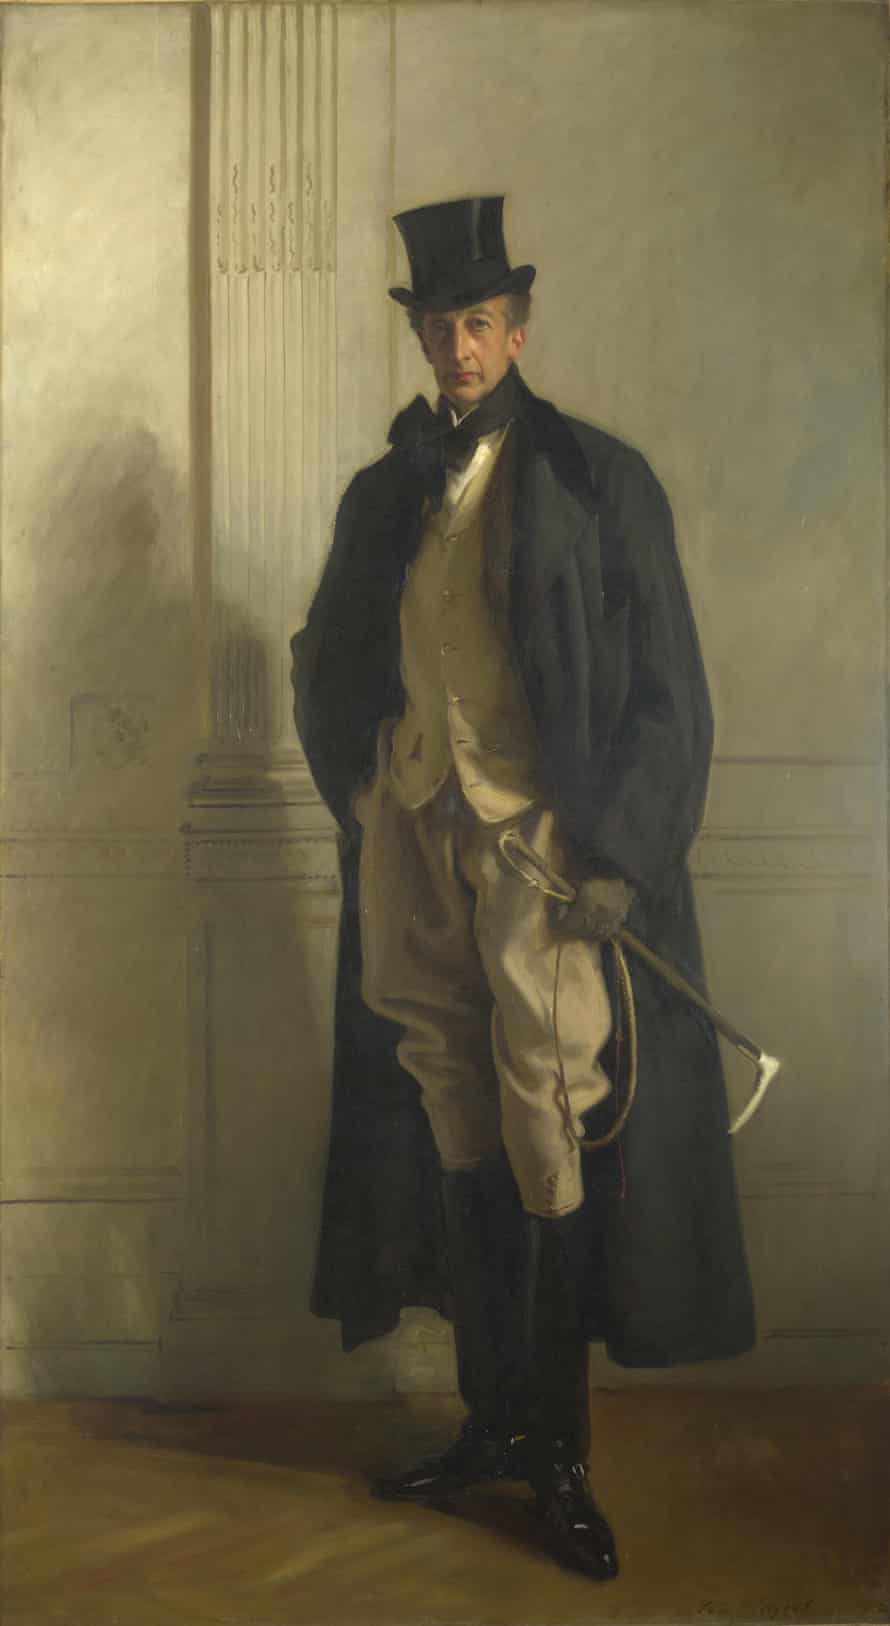 Thomas Lister (1854-1925), Lord Ribblesdale, 1902 – by John Singer Sargent.